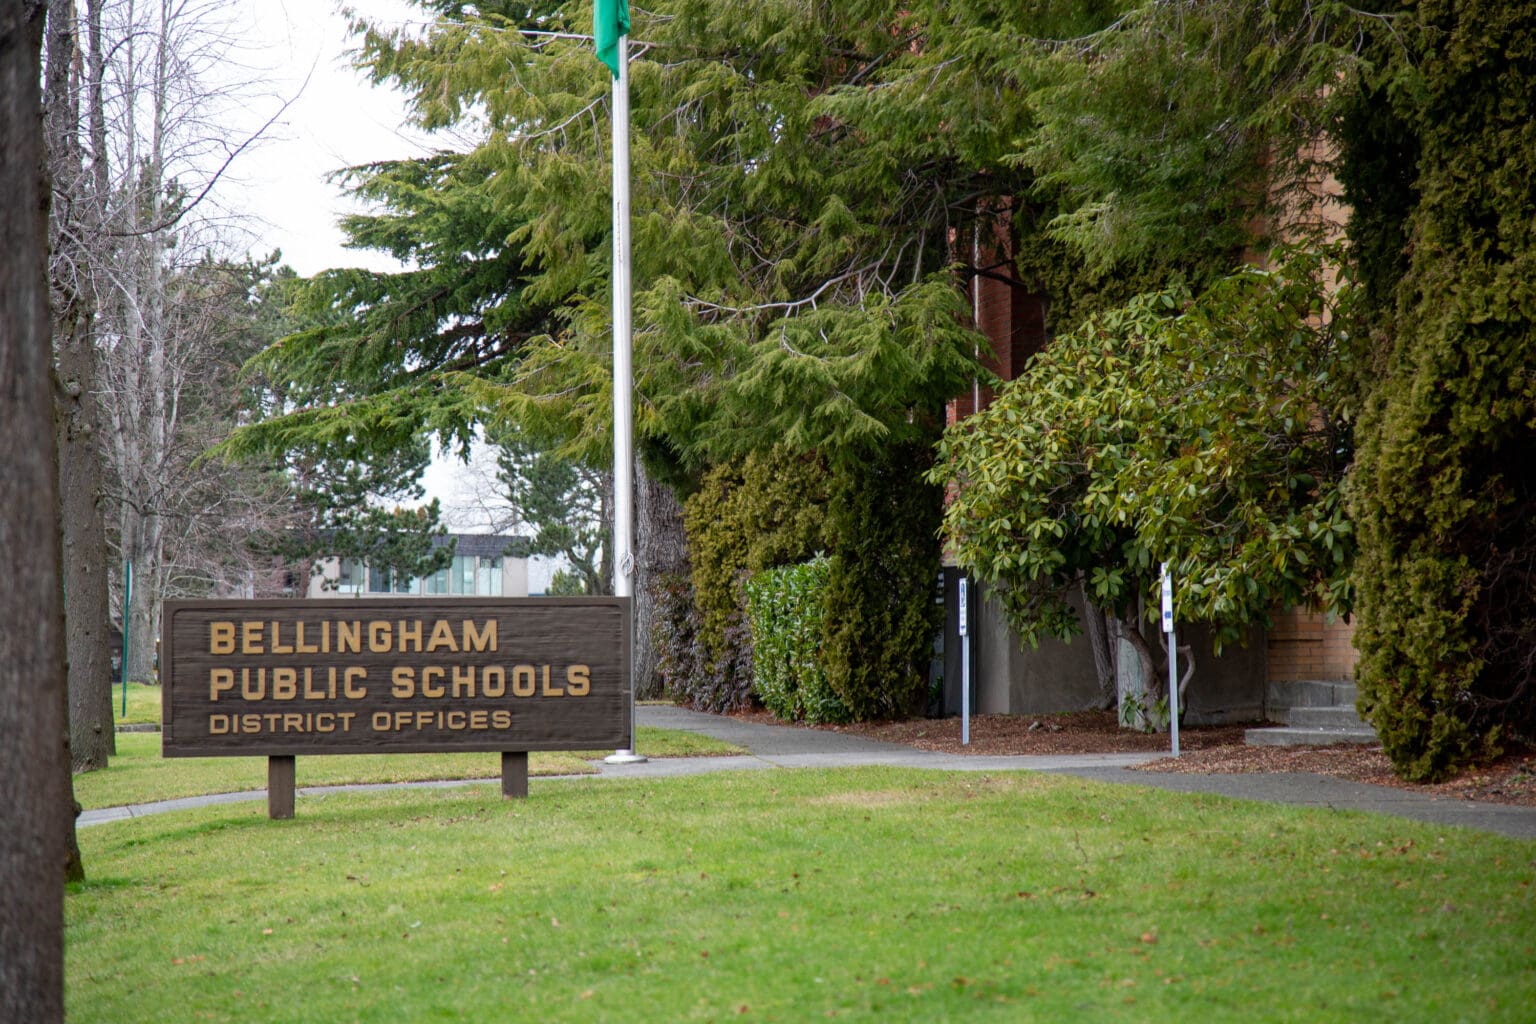 Bellingham Public Schools has rehired some staff whose positions were cut or reduced with budget cuts.